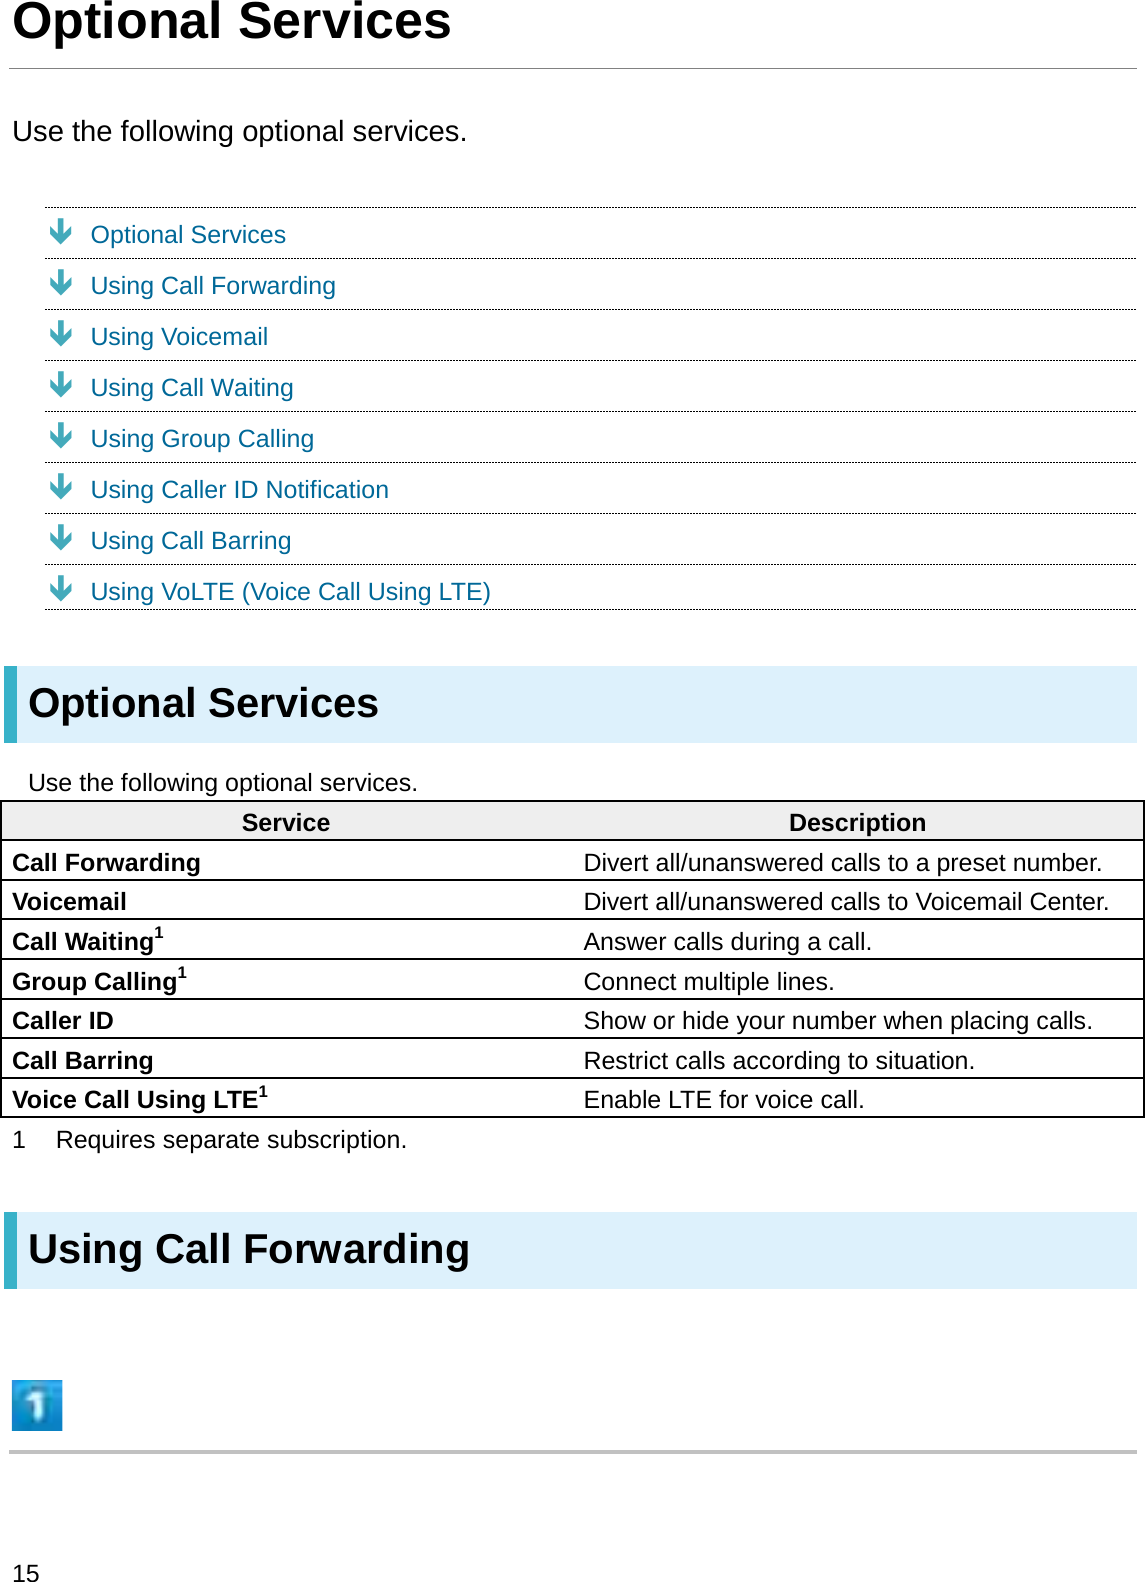 Optional ServicesUse the following optional services.ÐOptional ServicesÐUsing Call ForwardingÐUsing VoicemailÐUsing Call WaitingÐUsing Group CallingÐUsing Caller ID NotificationÐUsing Call BarringÐUsing VoLTE (Voice Call Using LTE)Optional ServicesUse the following optional services.Service DescriptionCall Forwarding Divert all/unanswered calls to a preset number.Voicemail Divert all/unanswered calls to Voicemail Center.Call Waiting1Answer calls during a call.Group Calling1Connect multiple lines.Caller ID Show or hide your number when placing calls.Call Barring Restrict calls according to situation.Voice Call Using LTE1Enable LTE for voice call.1 Requires separate subscription.Using Call Forwarding15